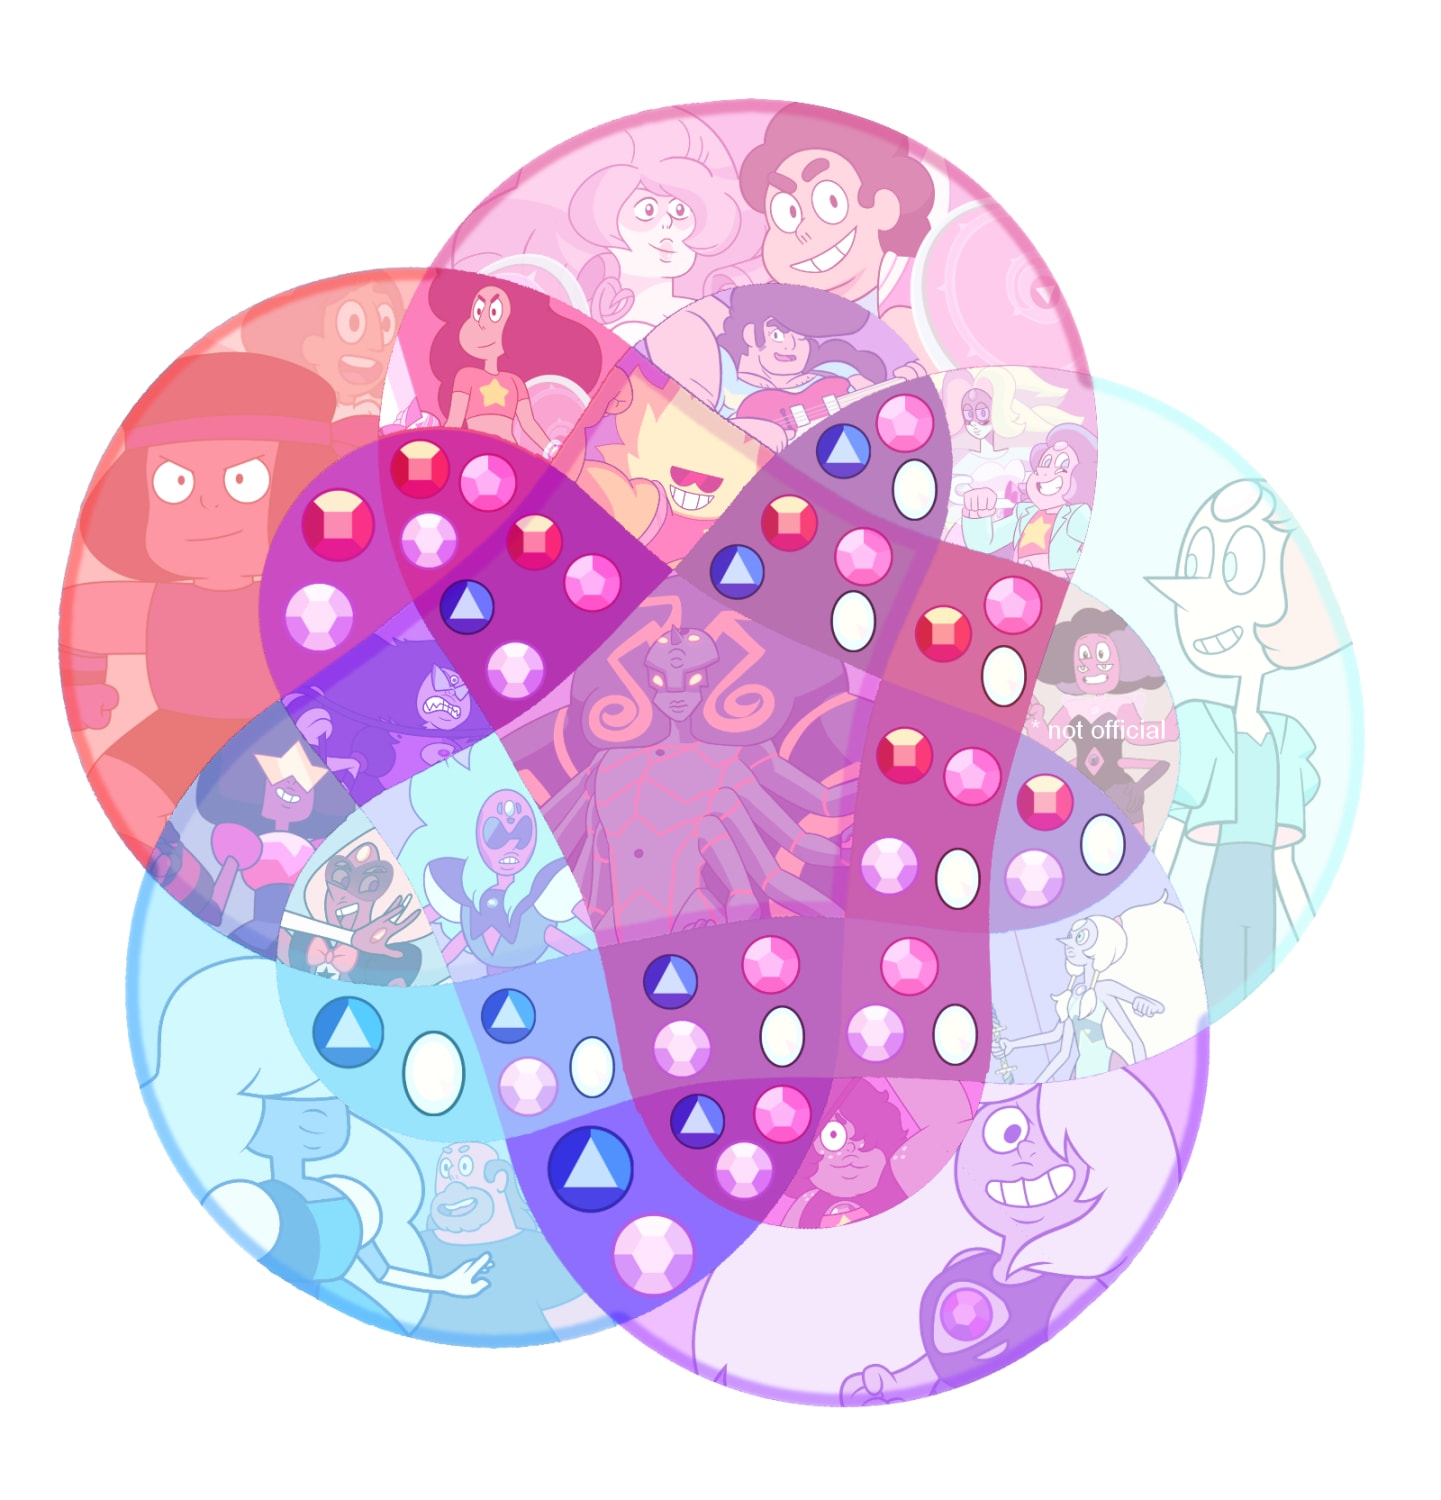 5-set Venn Diagram of all of Steven Universe's fusions of the main 5 characters.